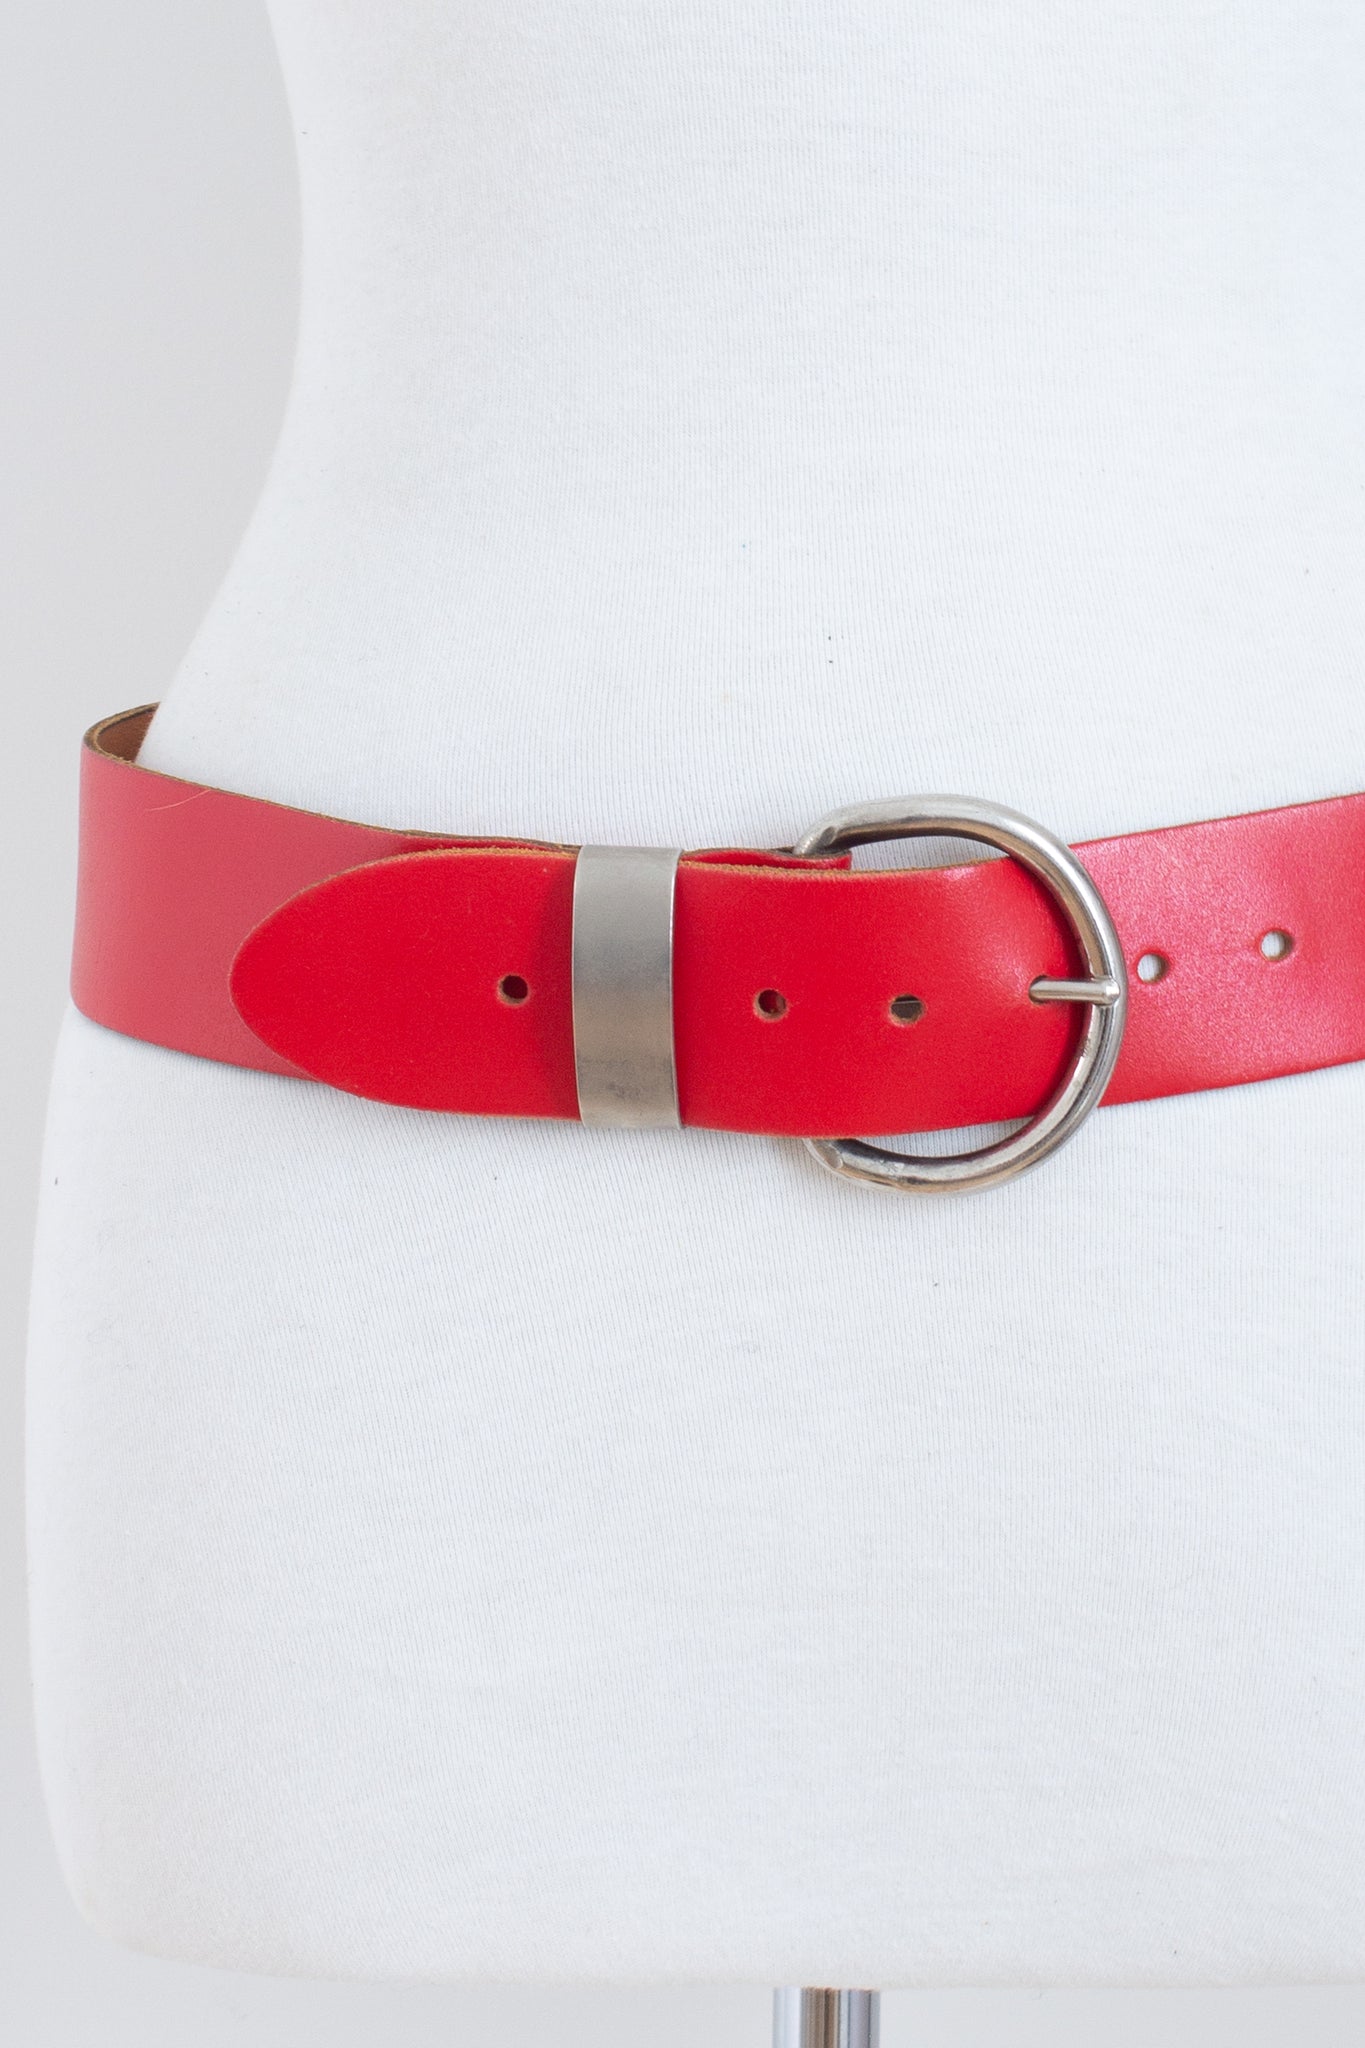 80s Bright Red Wide Leather Belt with Silver Buckle - Size 33"-39" / M-L